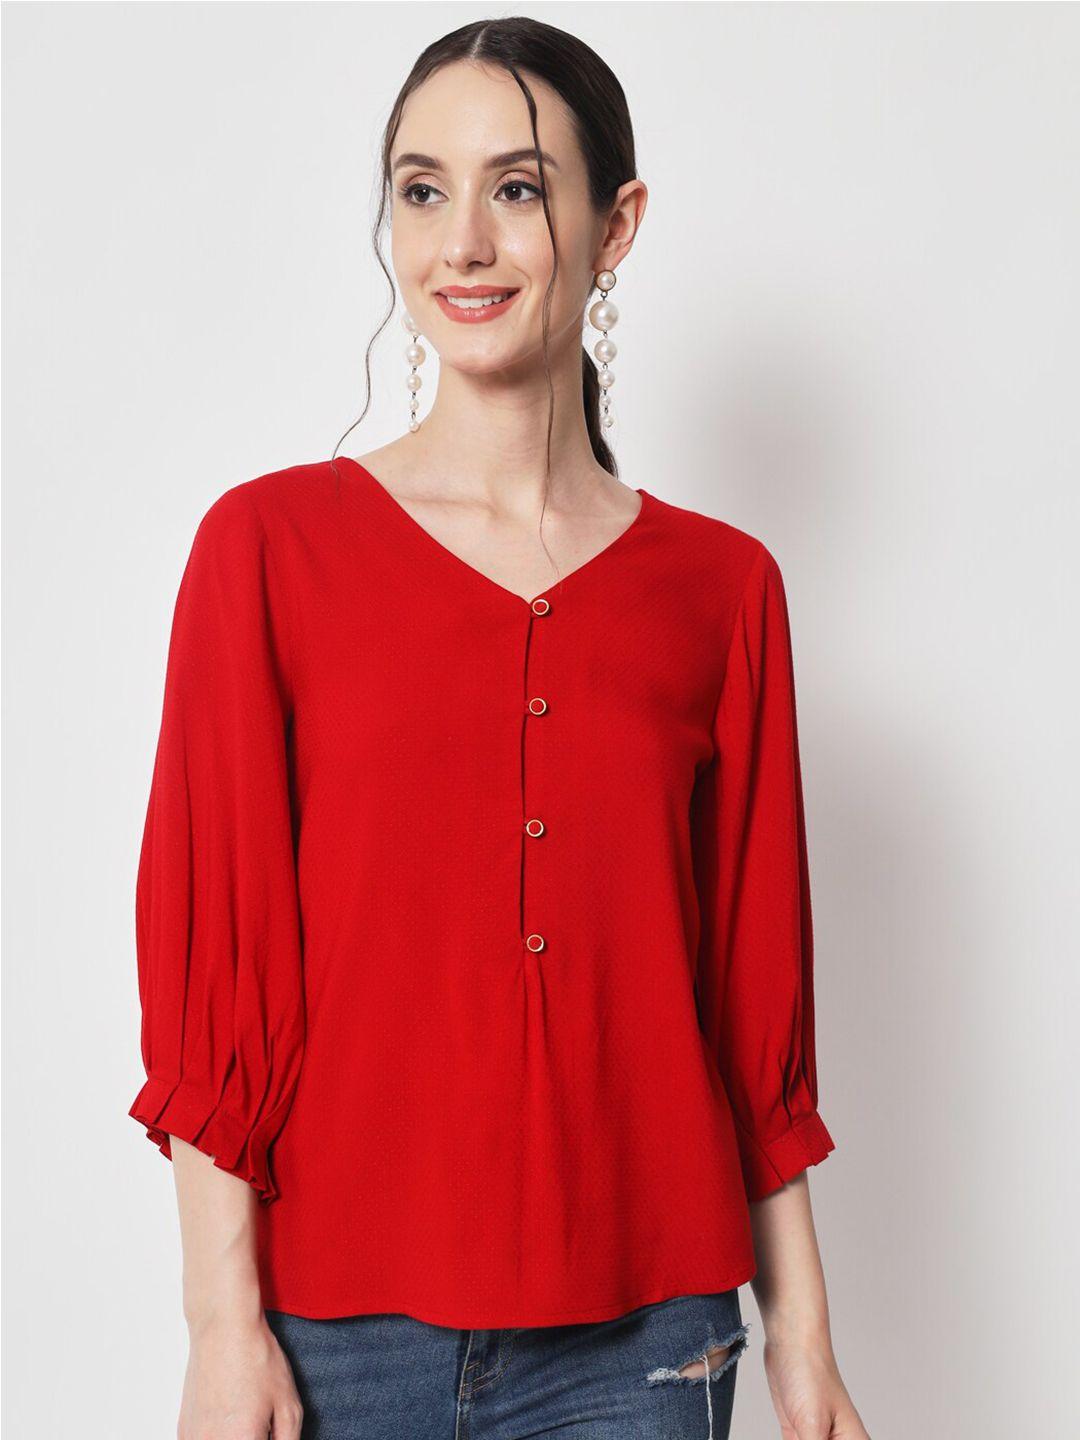 here&now red shirt style top